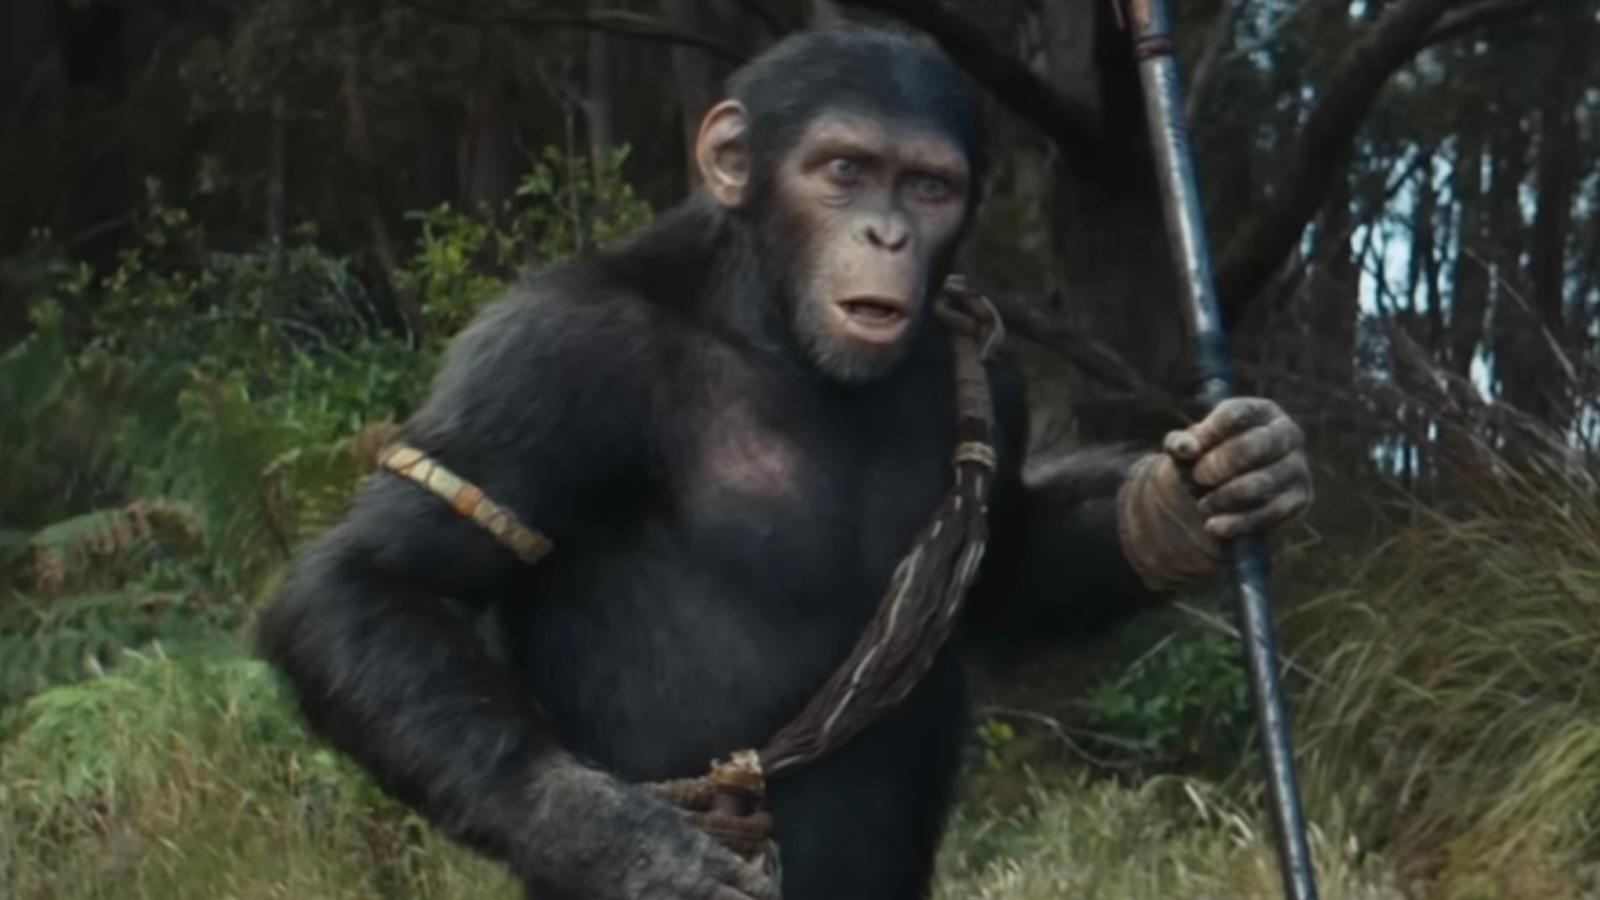 Owen Teague as Not in Kingdom of the Planet of the Apes